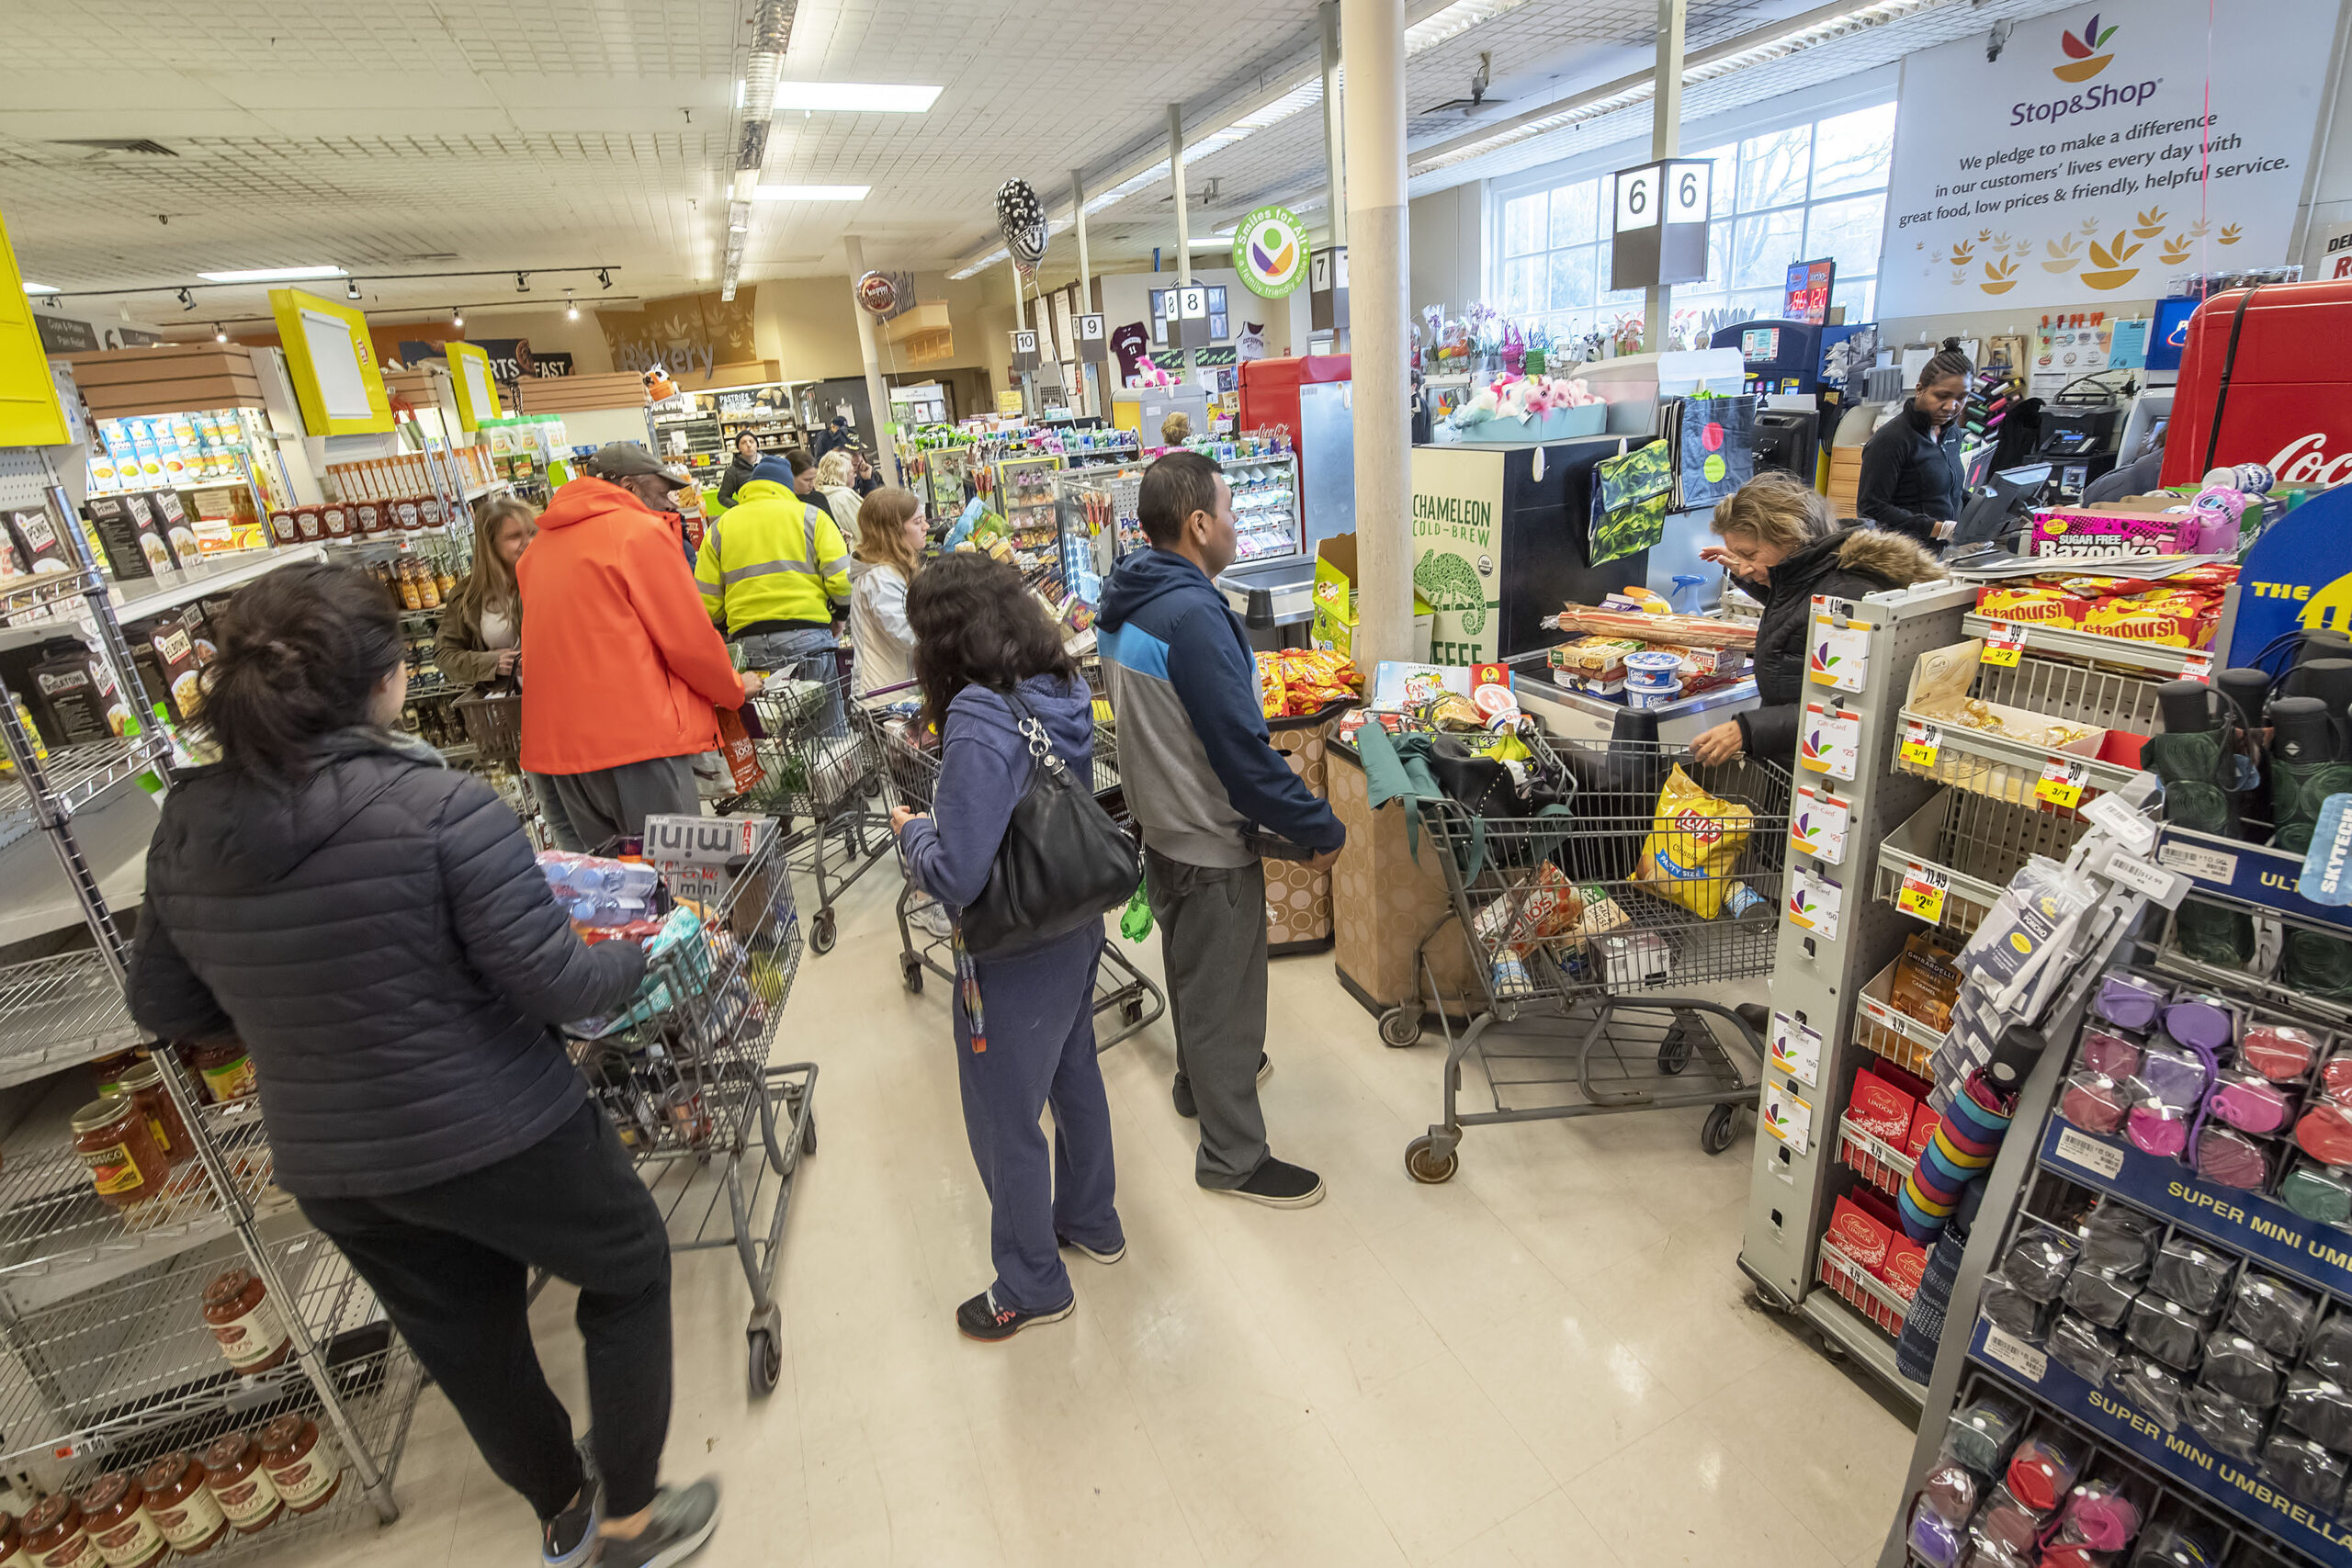 The scene in the East Hampton Stop & Shop supermarket on Friday afternoon on March 13, 2020. MICHAEL HELLER